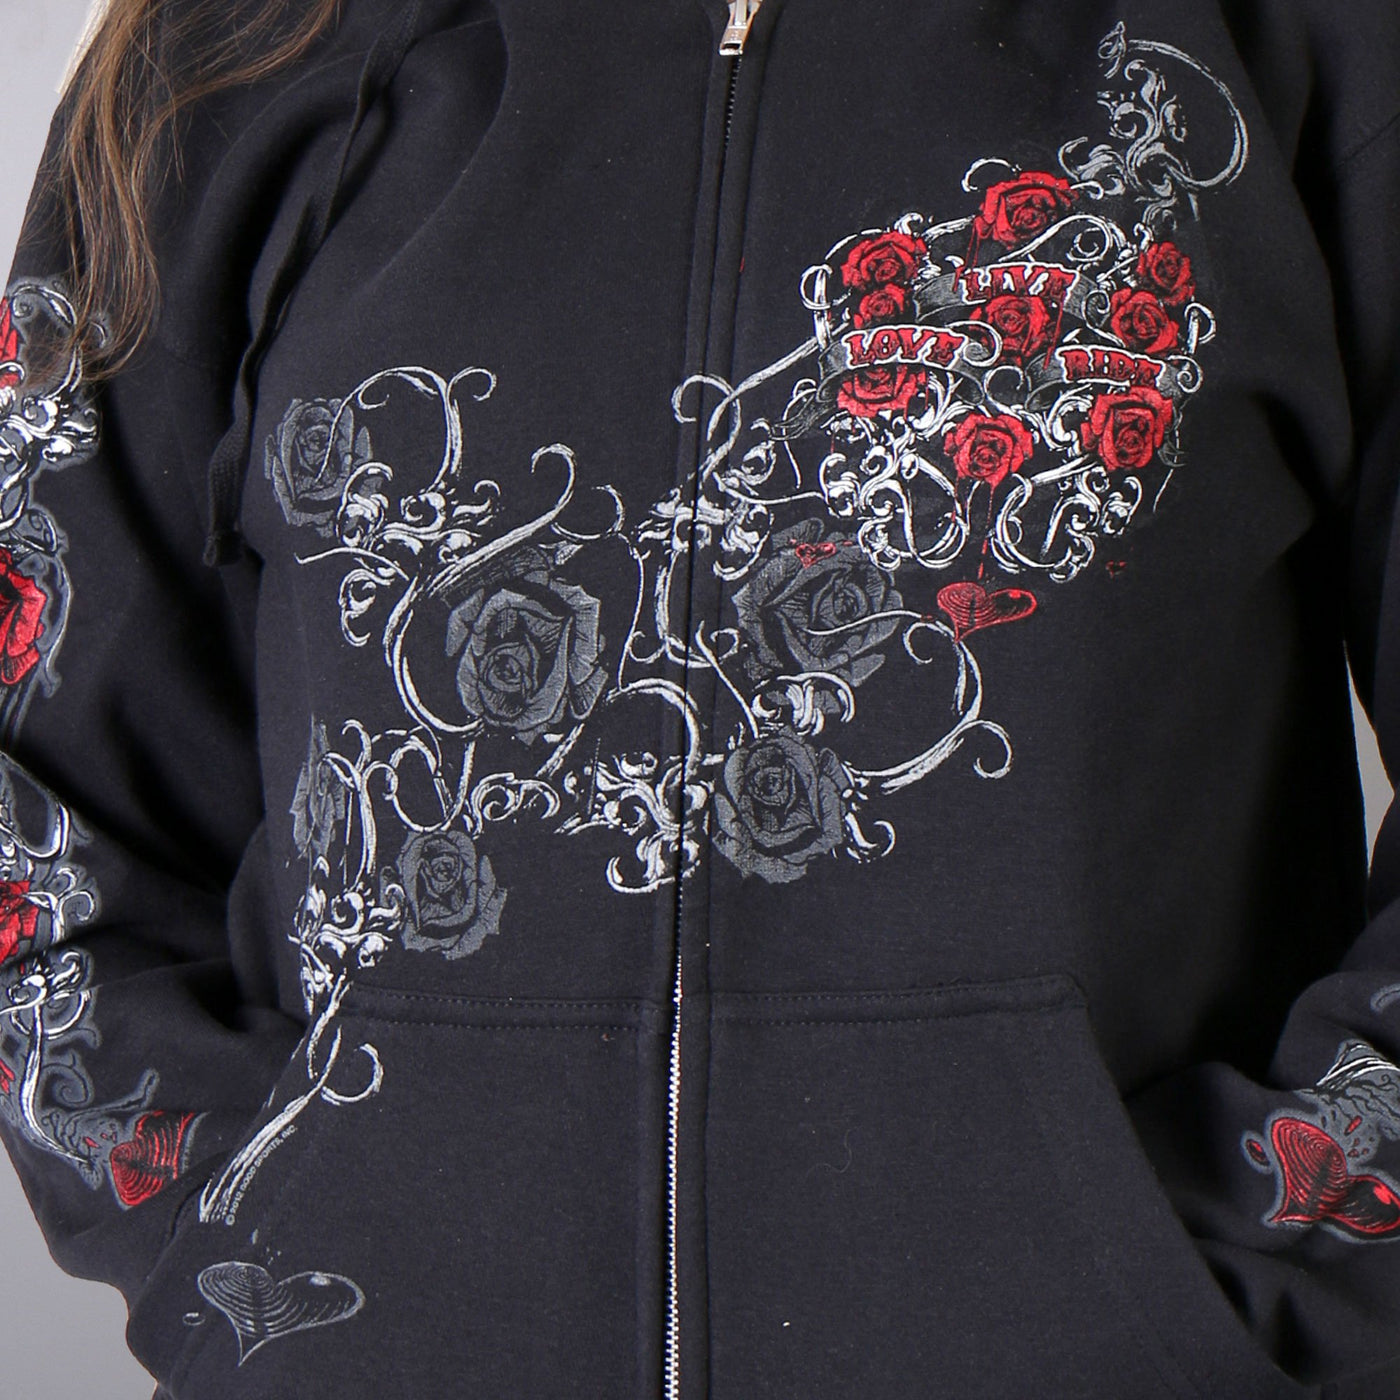 Hot Leathers Women's Hooded Sweatshirt With Live, Love, Ride And Roses